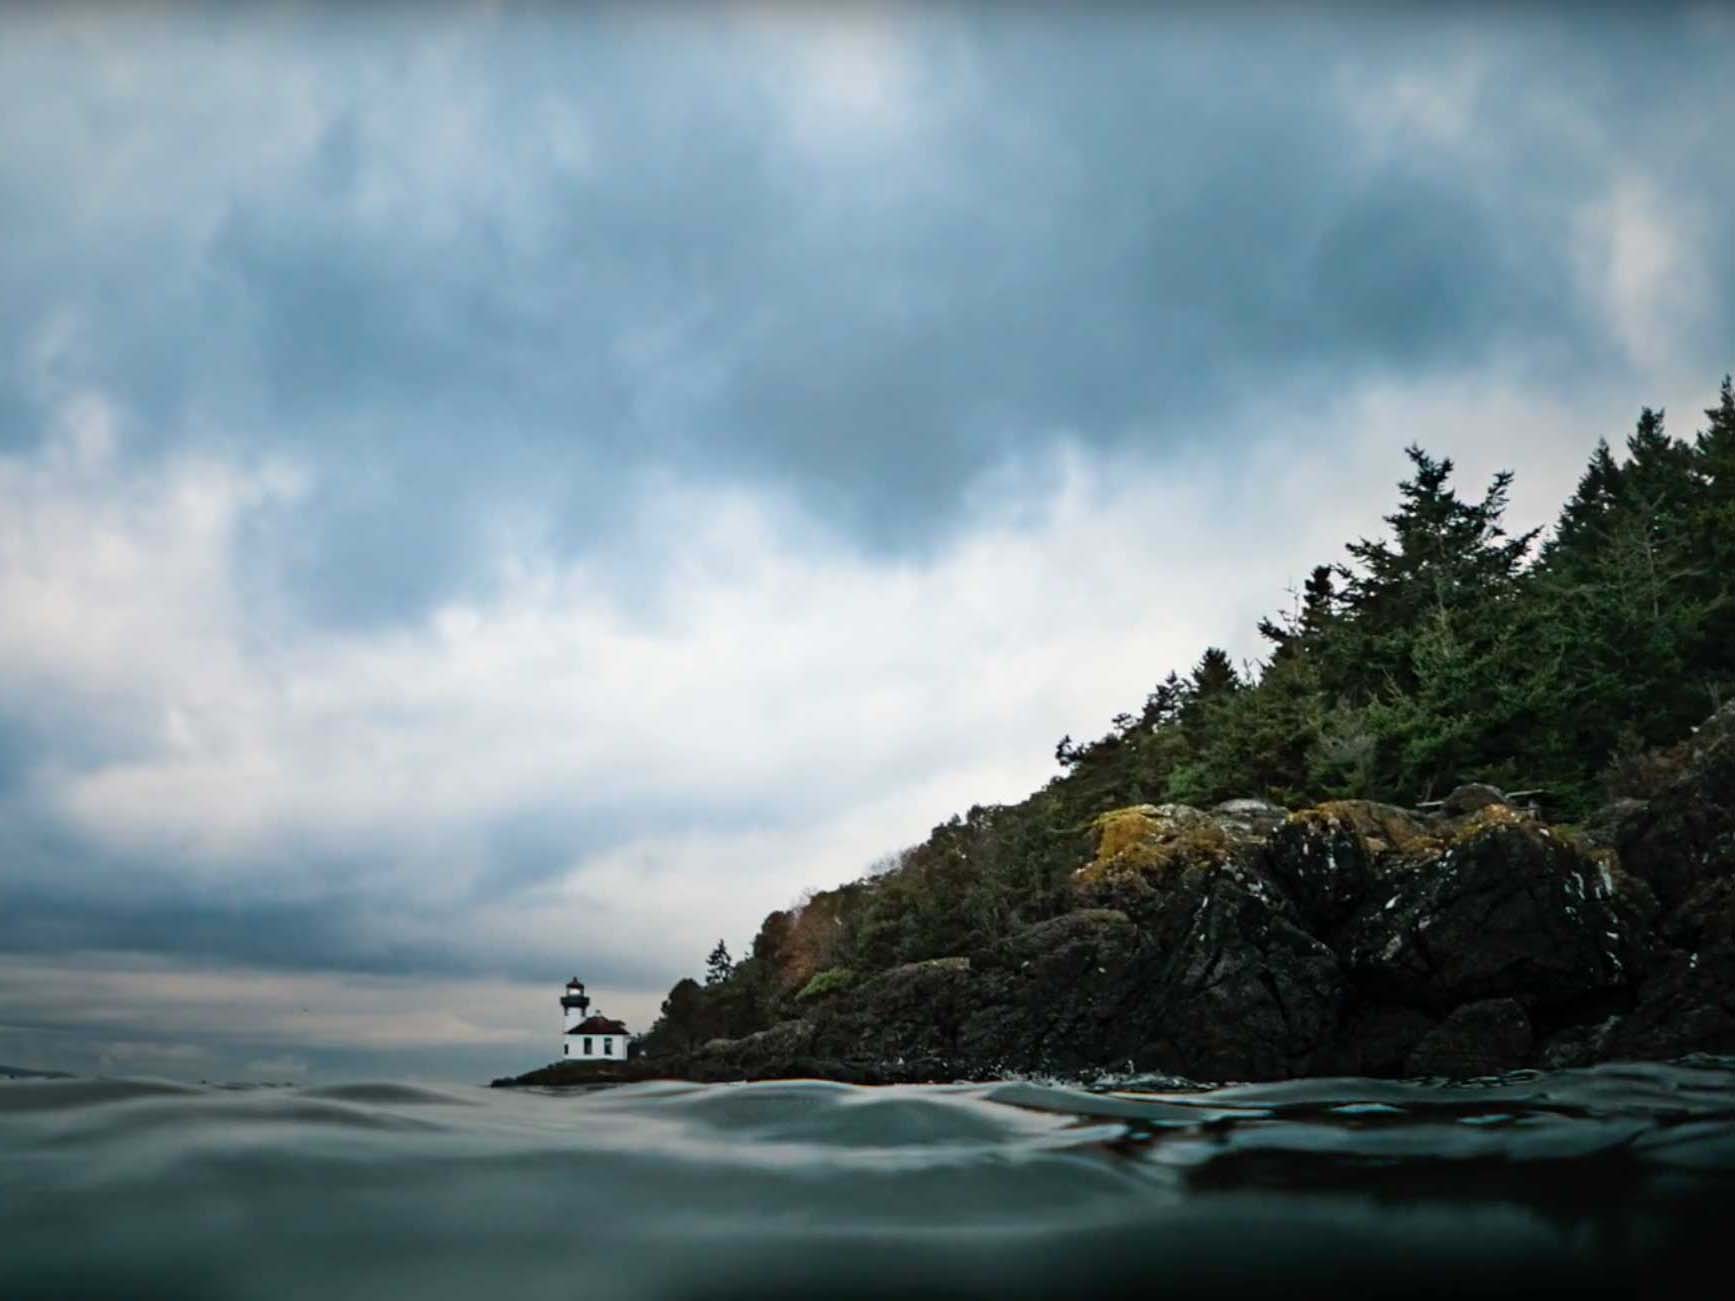 Freediving the Orca Trail with the PNW Protectors [VIDEO]